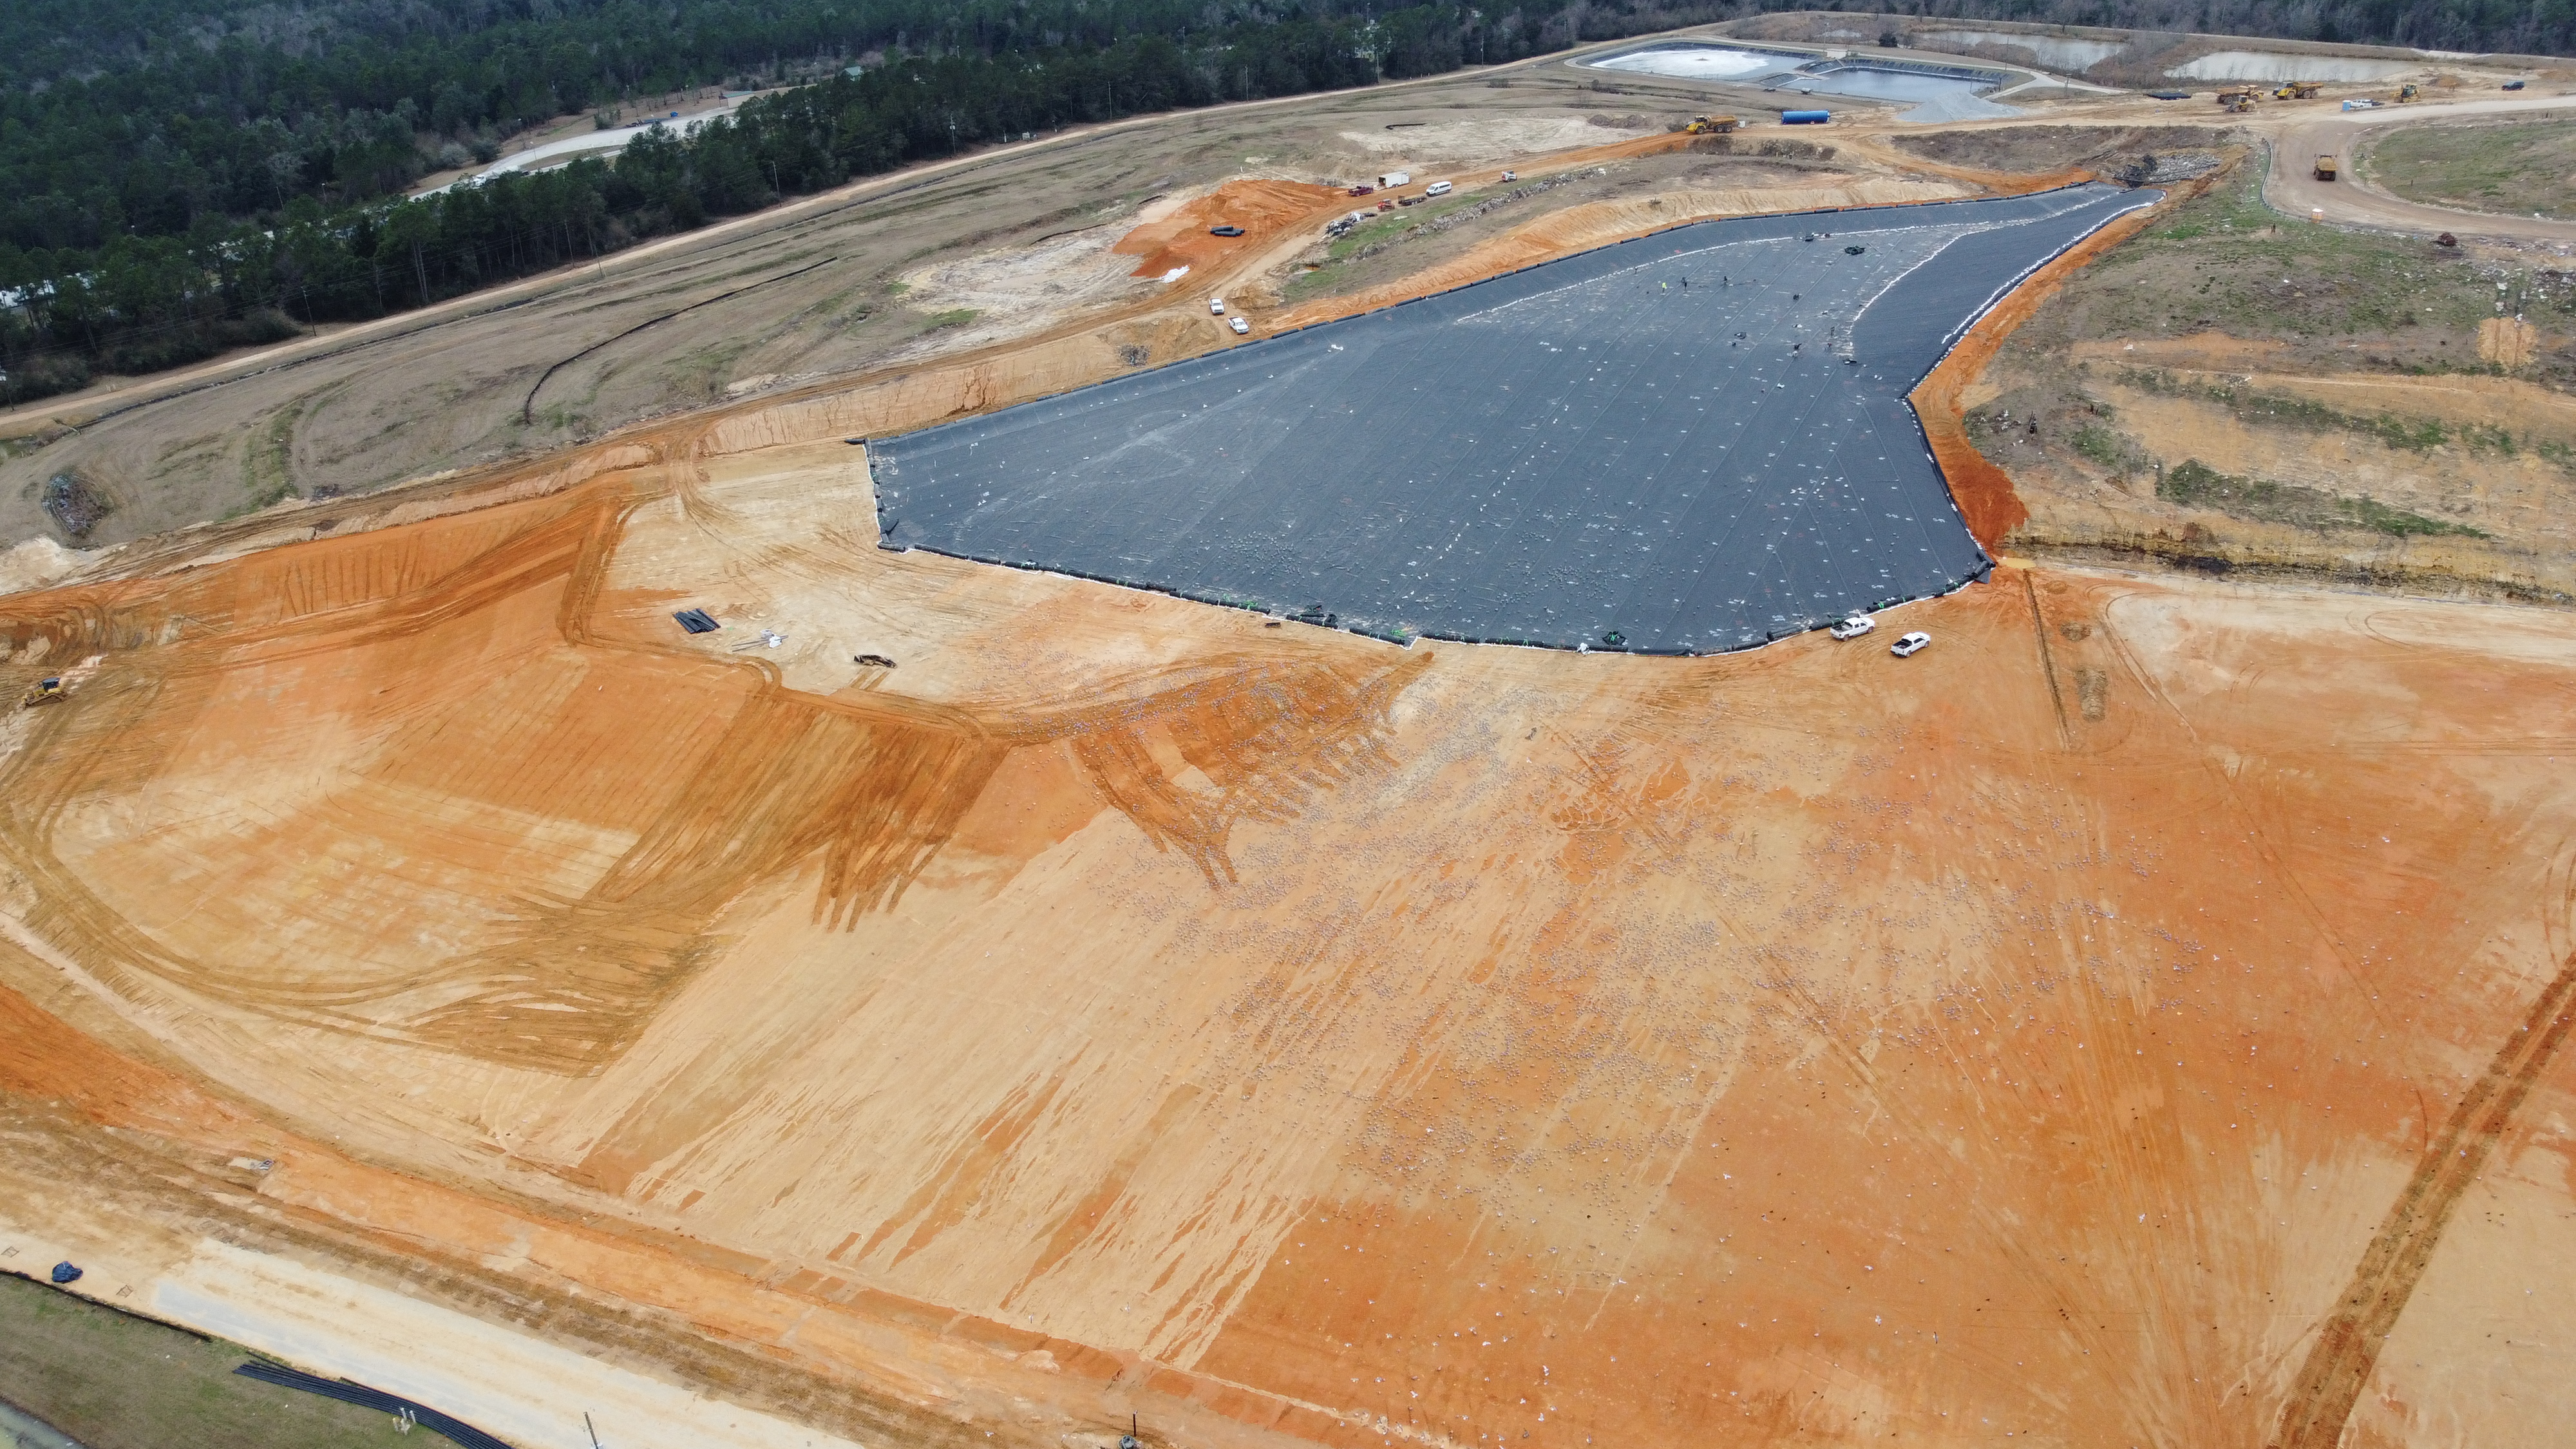 Expansion of the Perdido Landfill